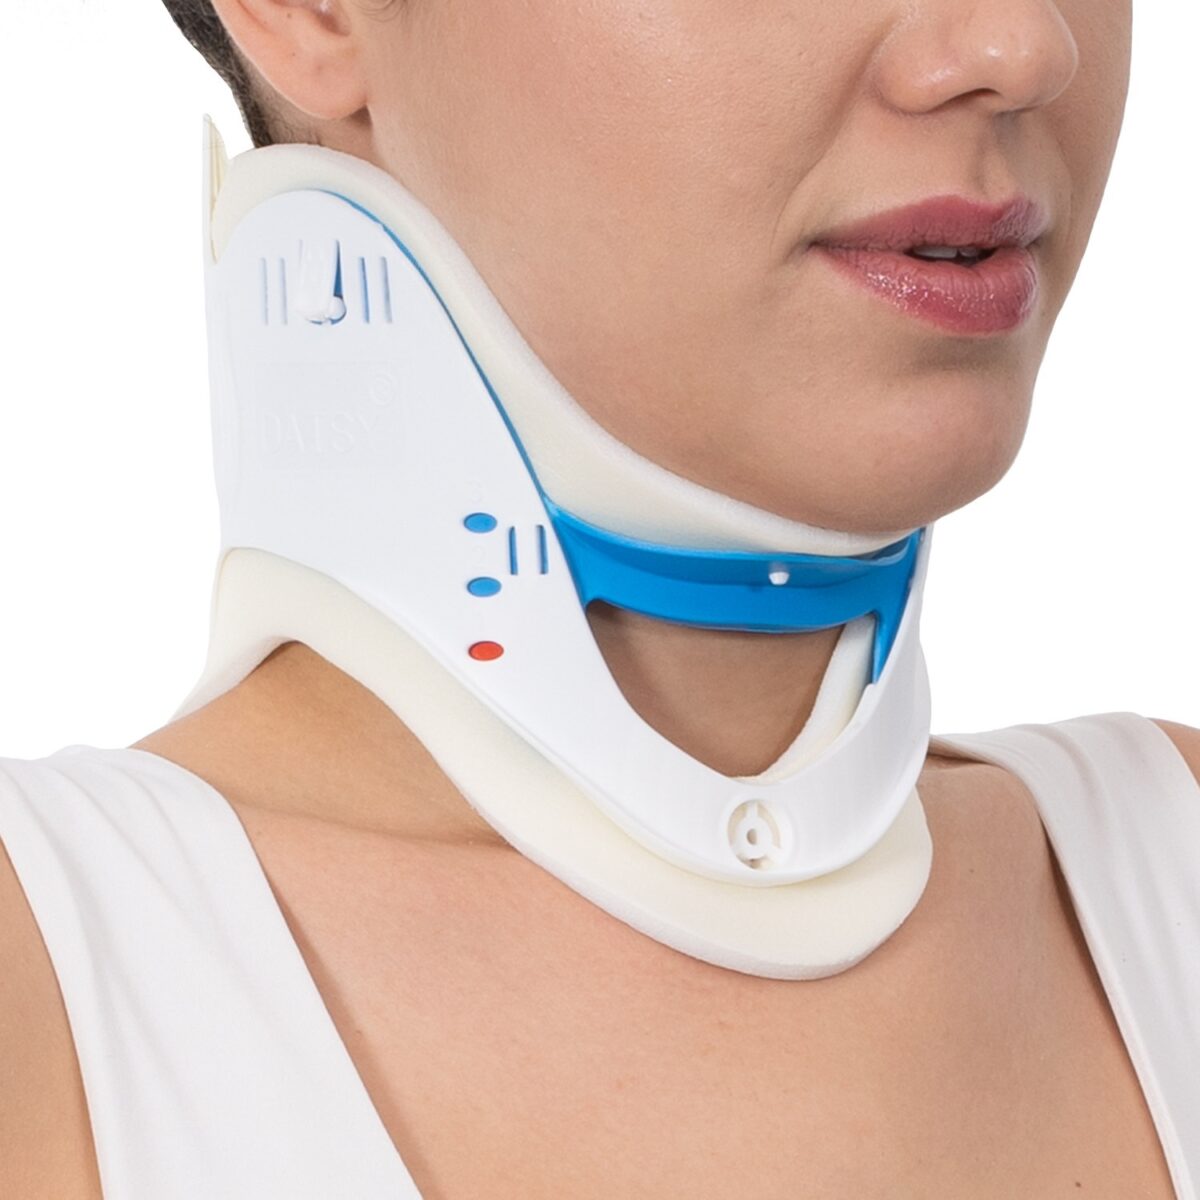 wingmed orthopedic equipments W110 adjustable first aid collar product 4 1